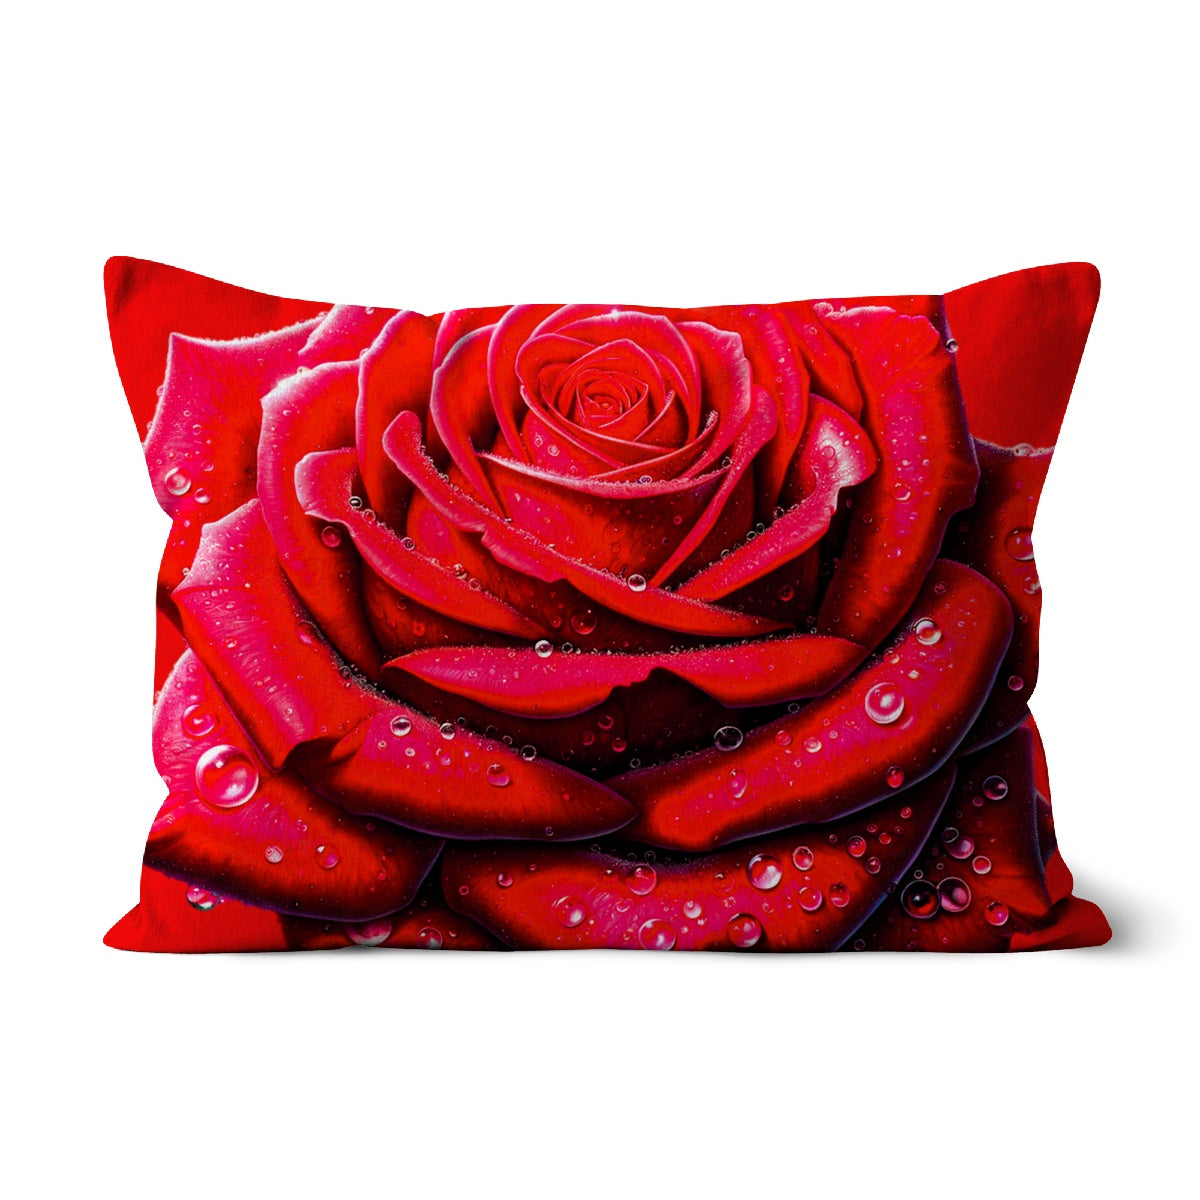 Red Rose Waterdrops Cushion